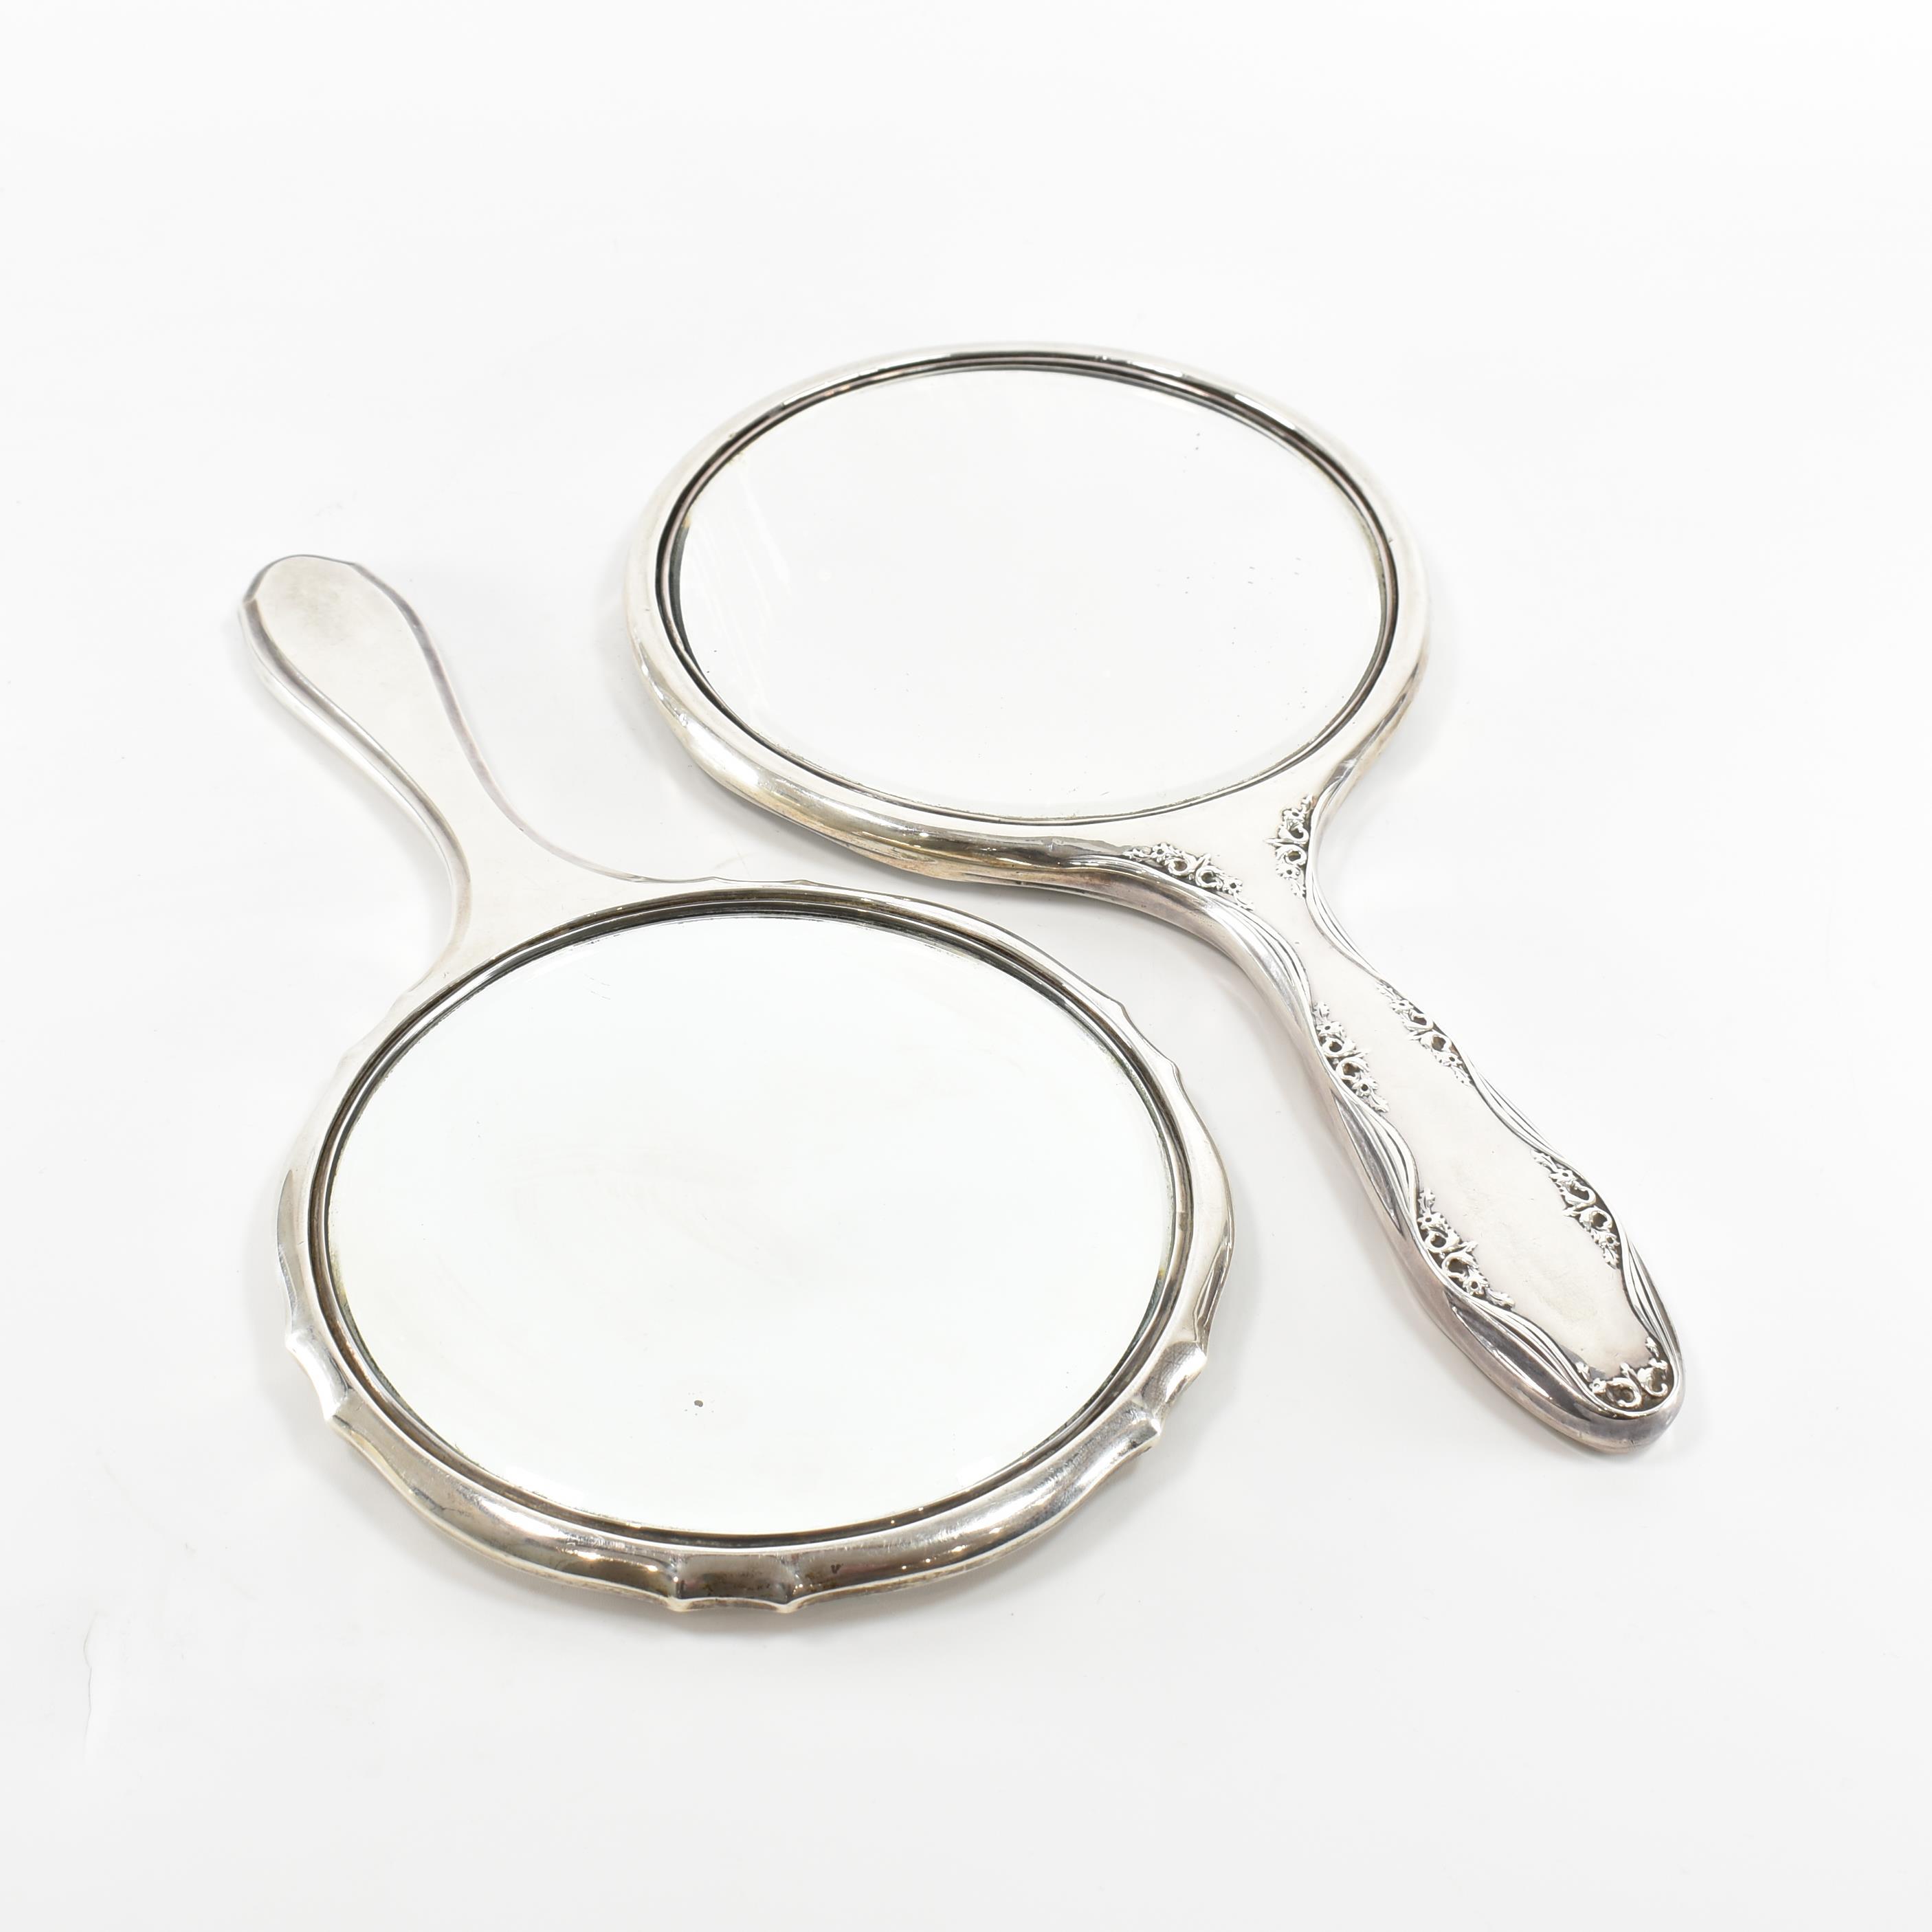 TWO MID CENTURY HALLMARKED SILVER HAND MIRRORS - Image 2 of 6